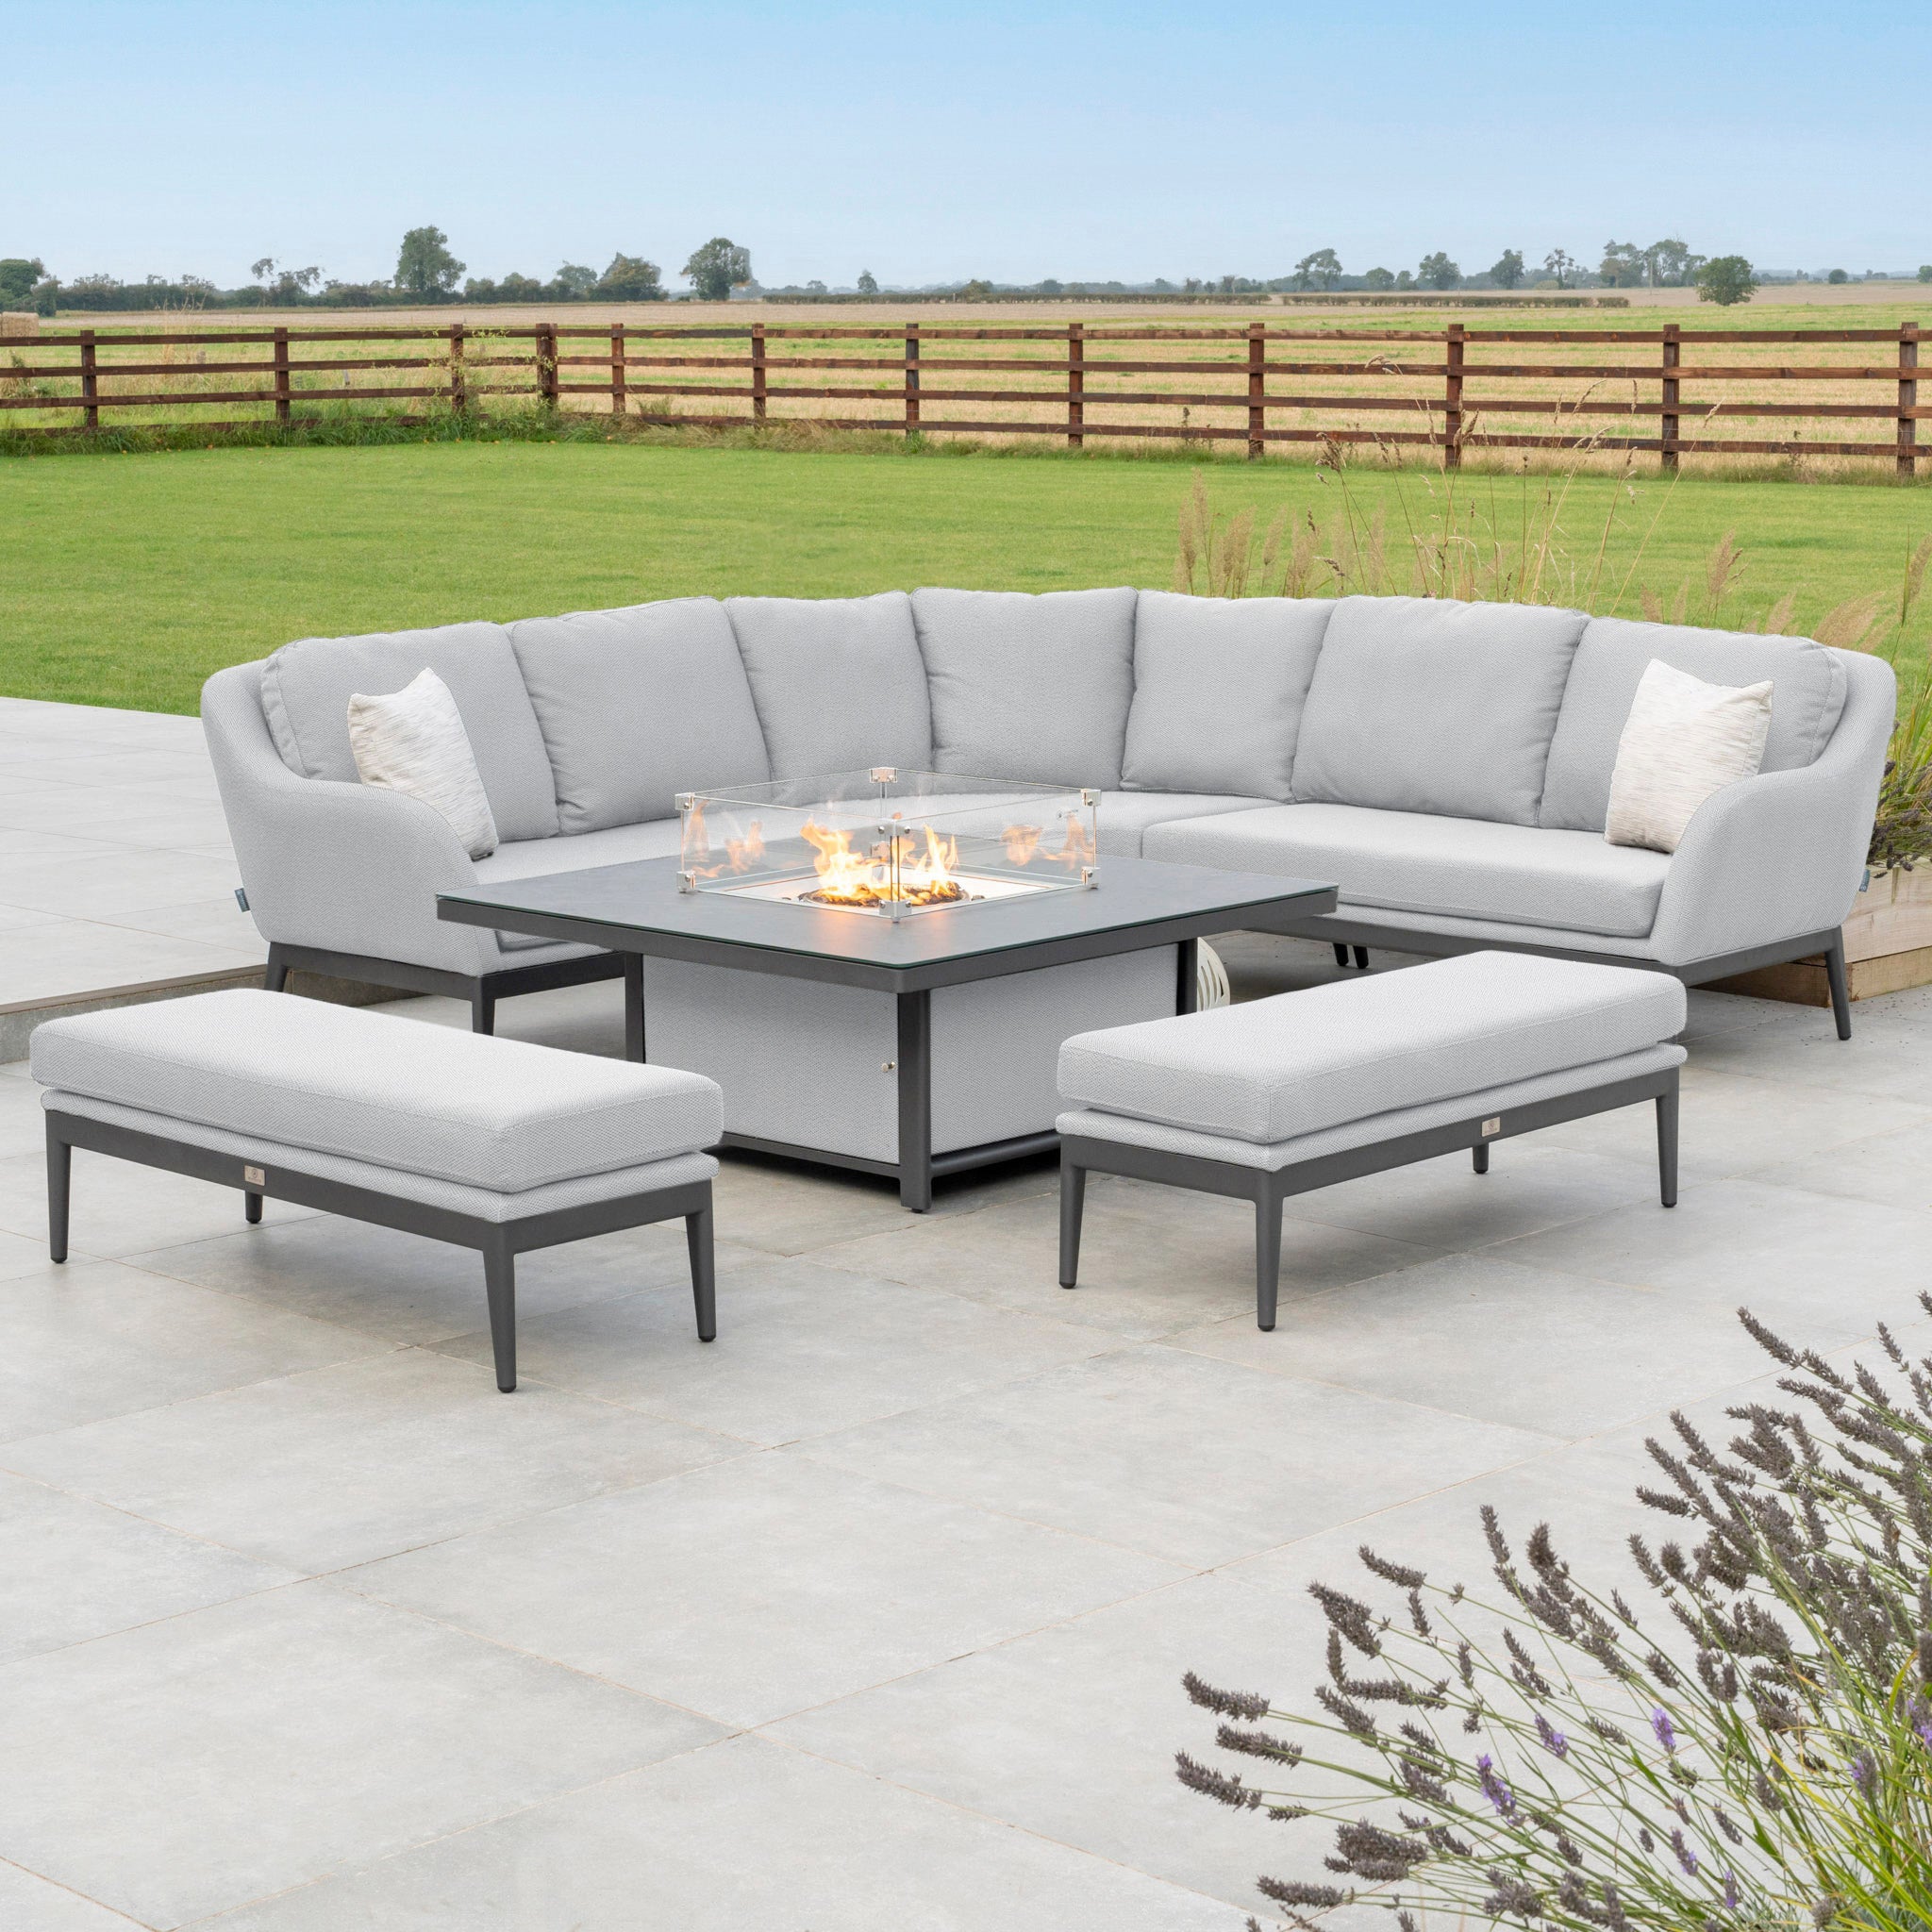 Luna Deluxe Outdoor Fabric Square Corner Dining Set with Rising Firepit Table in Oyster Grey